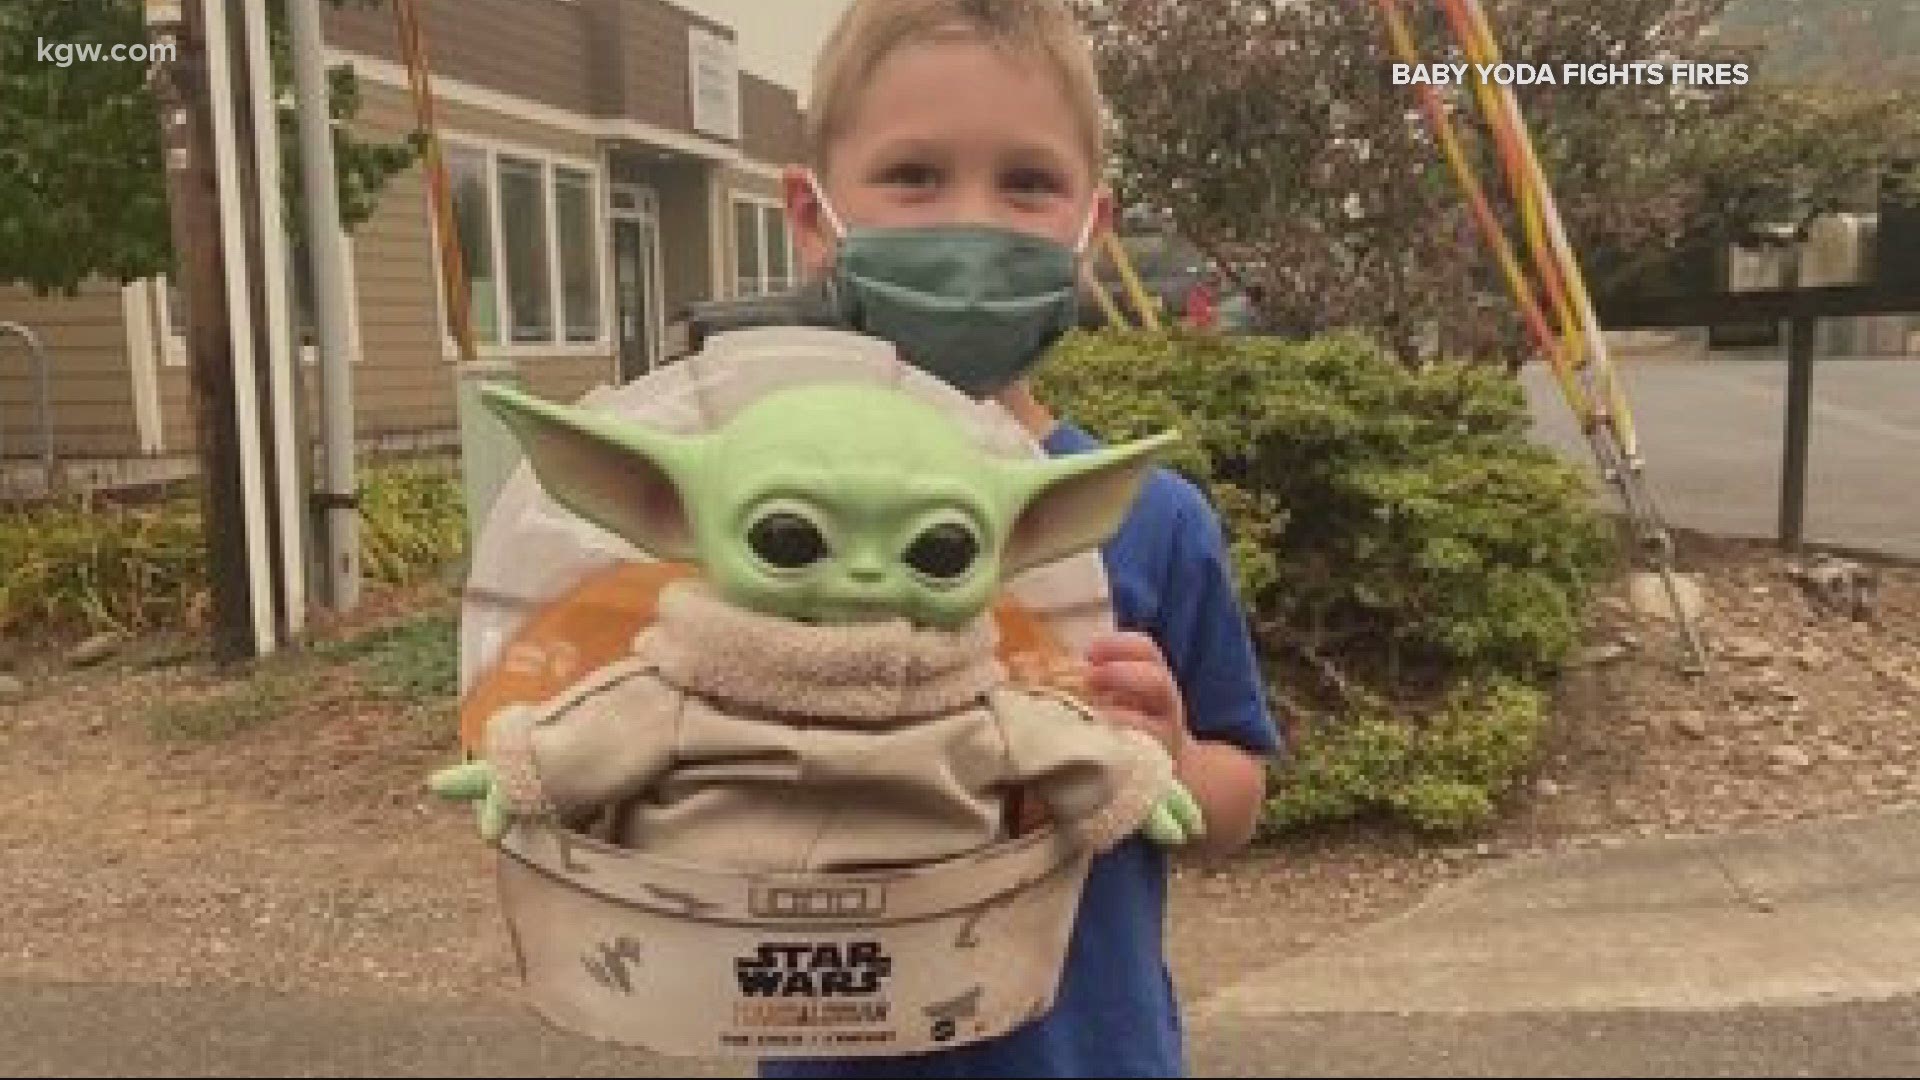 A 5-year-old boy in Scappoose decided to send Baby Yoda to firefighters to cheer them up.